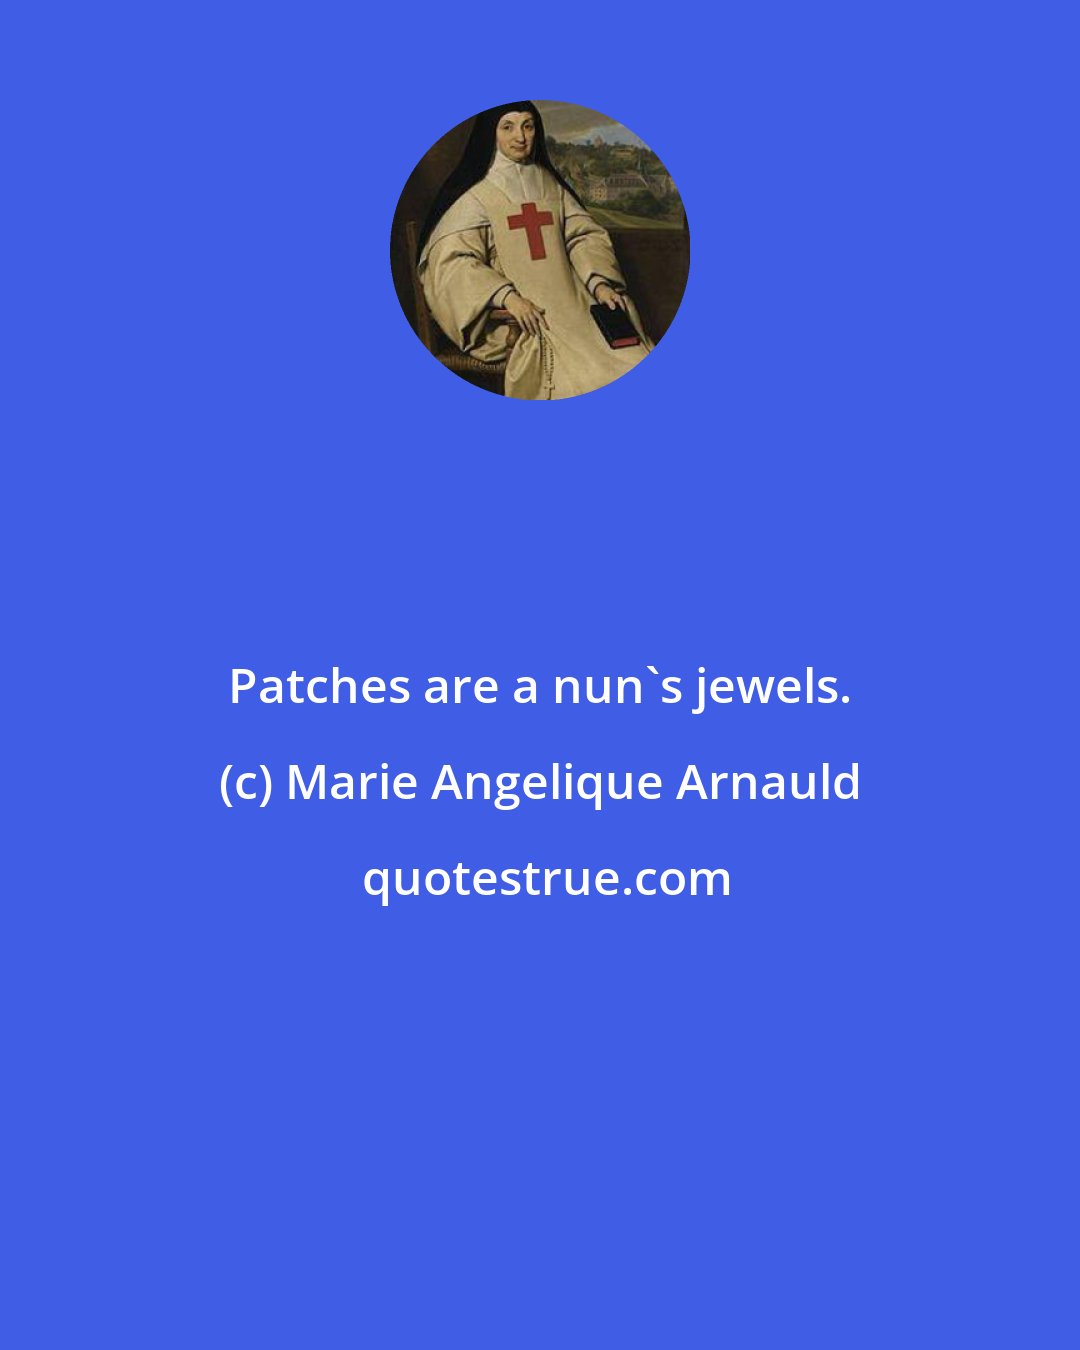 Marie Angelique Arnauld: Patches are a nun's jewels.